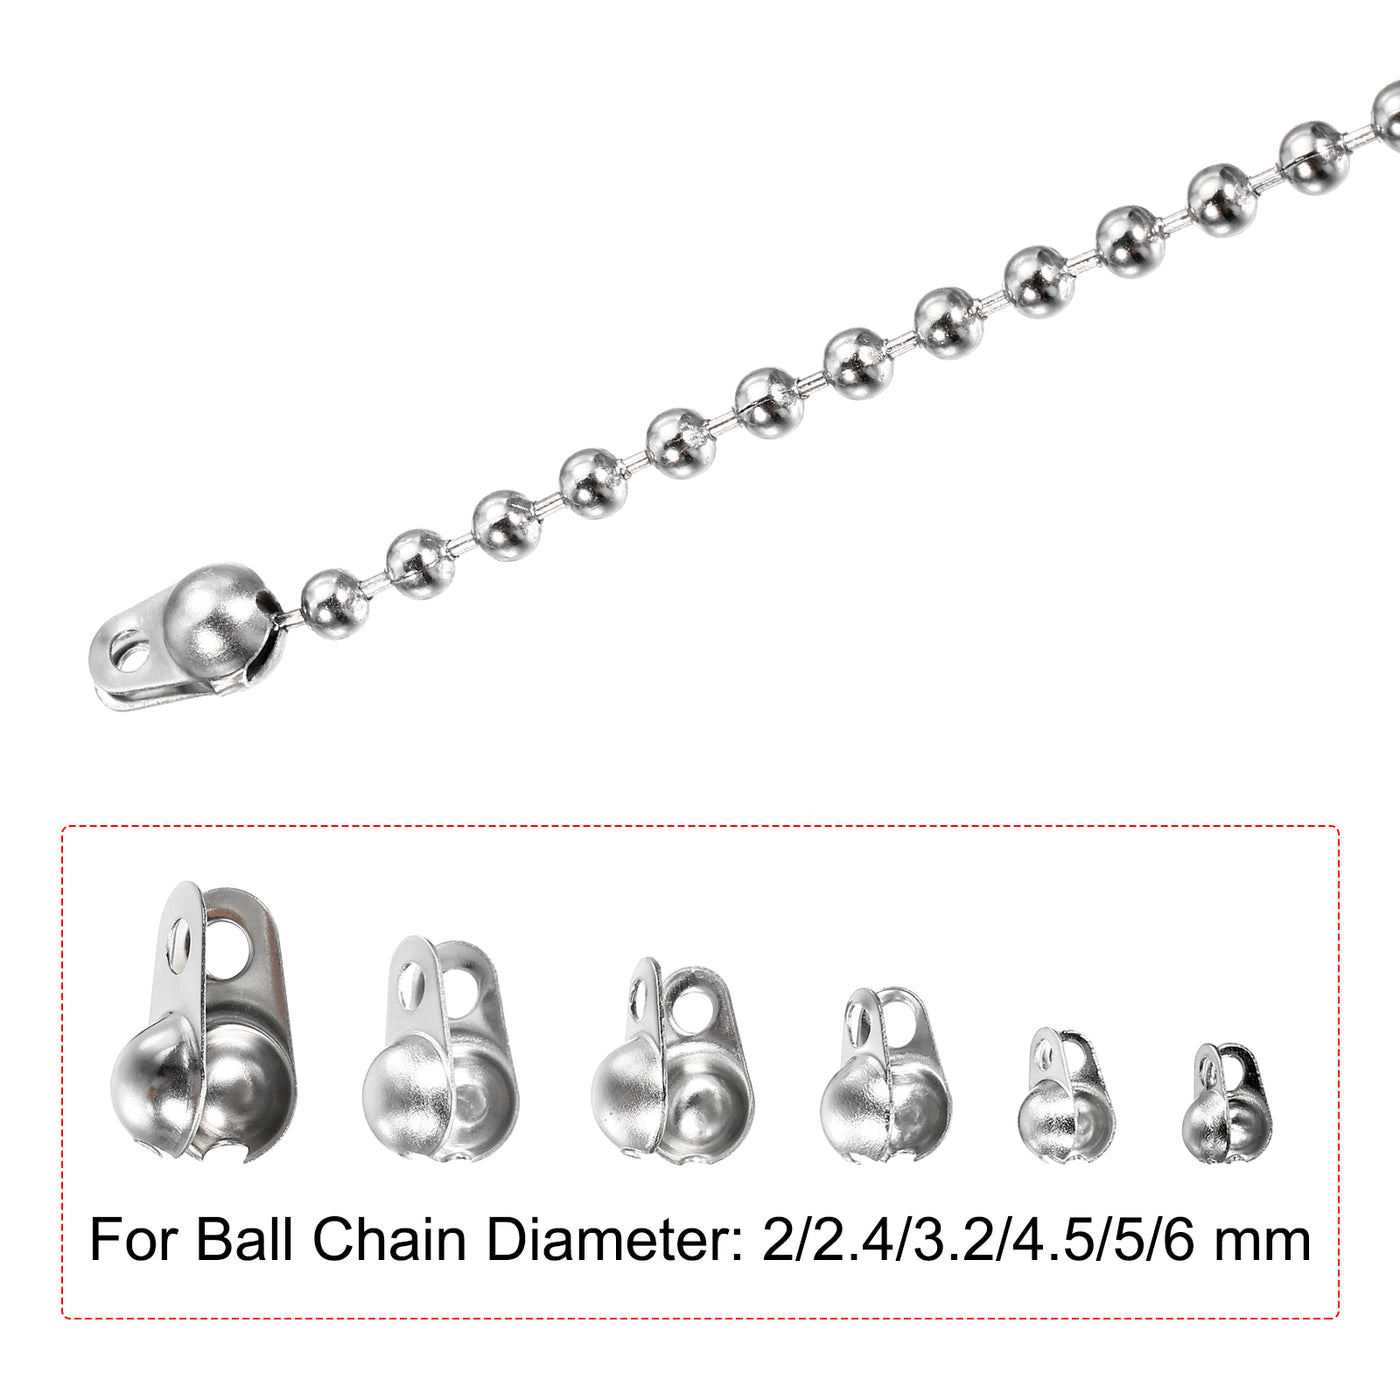 Harfington Ball Chain Connector, Stainless Steel Ball Tips Clamshell Style Crimp Link Connection Fit for 2/2.4/3.2/4.5/5/6mm Ball Chain, Pack of 130